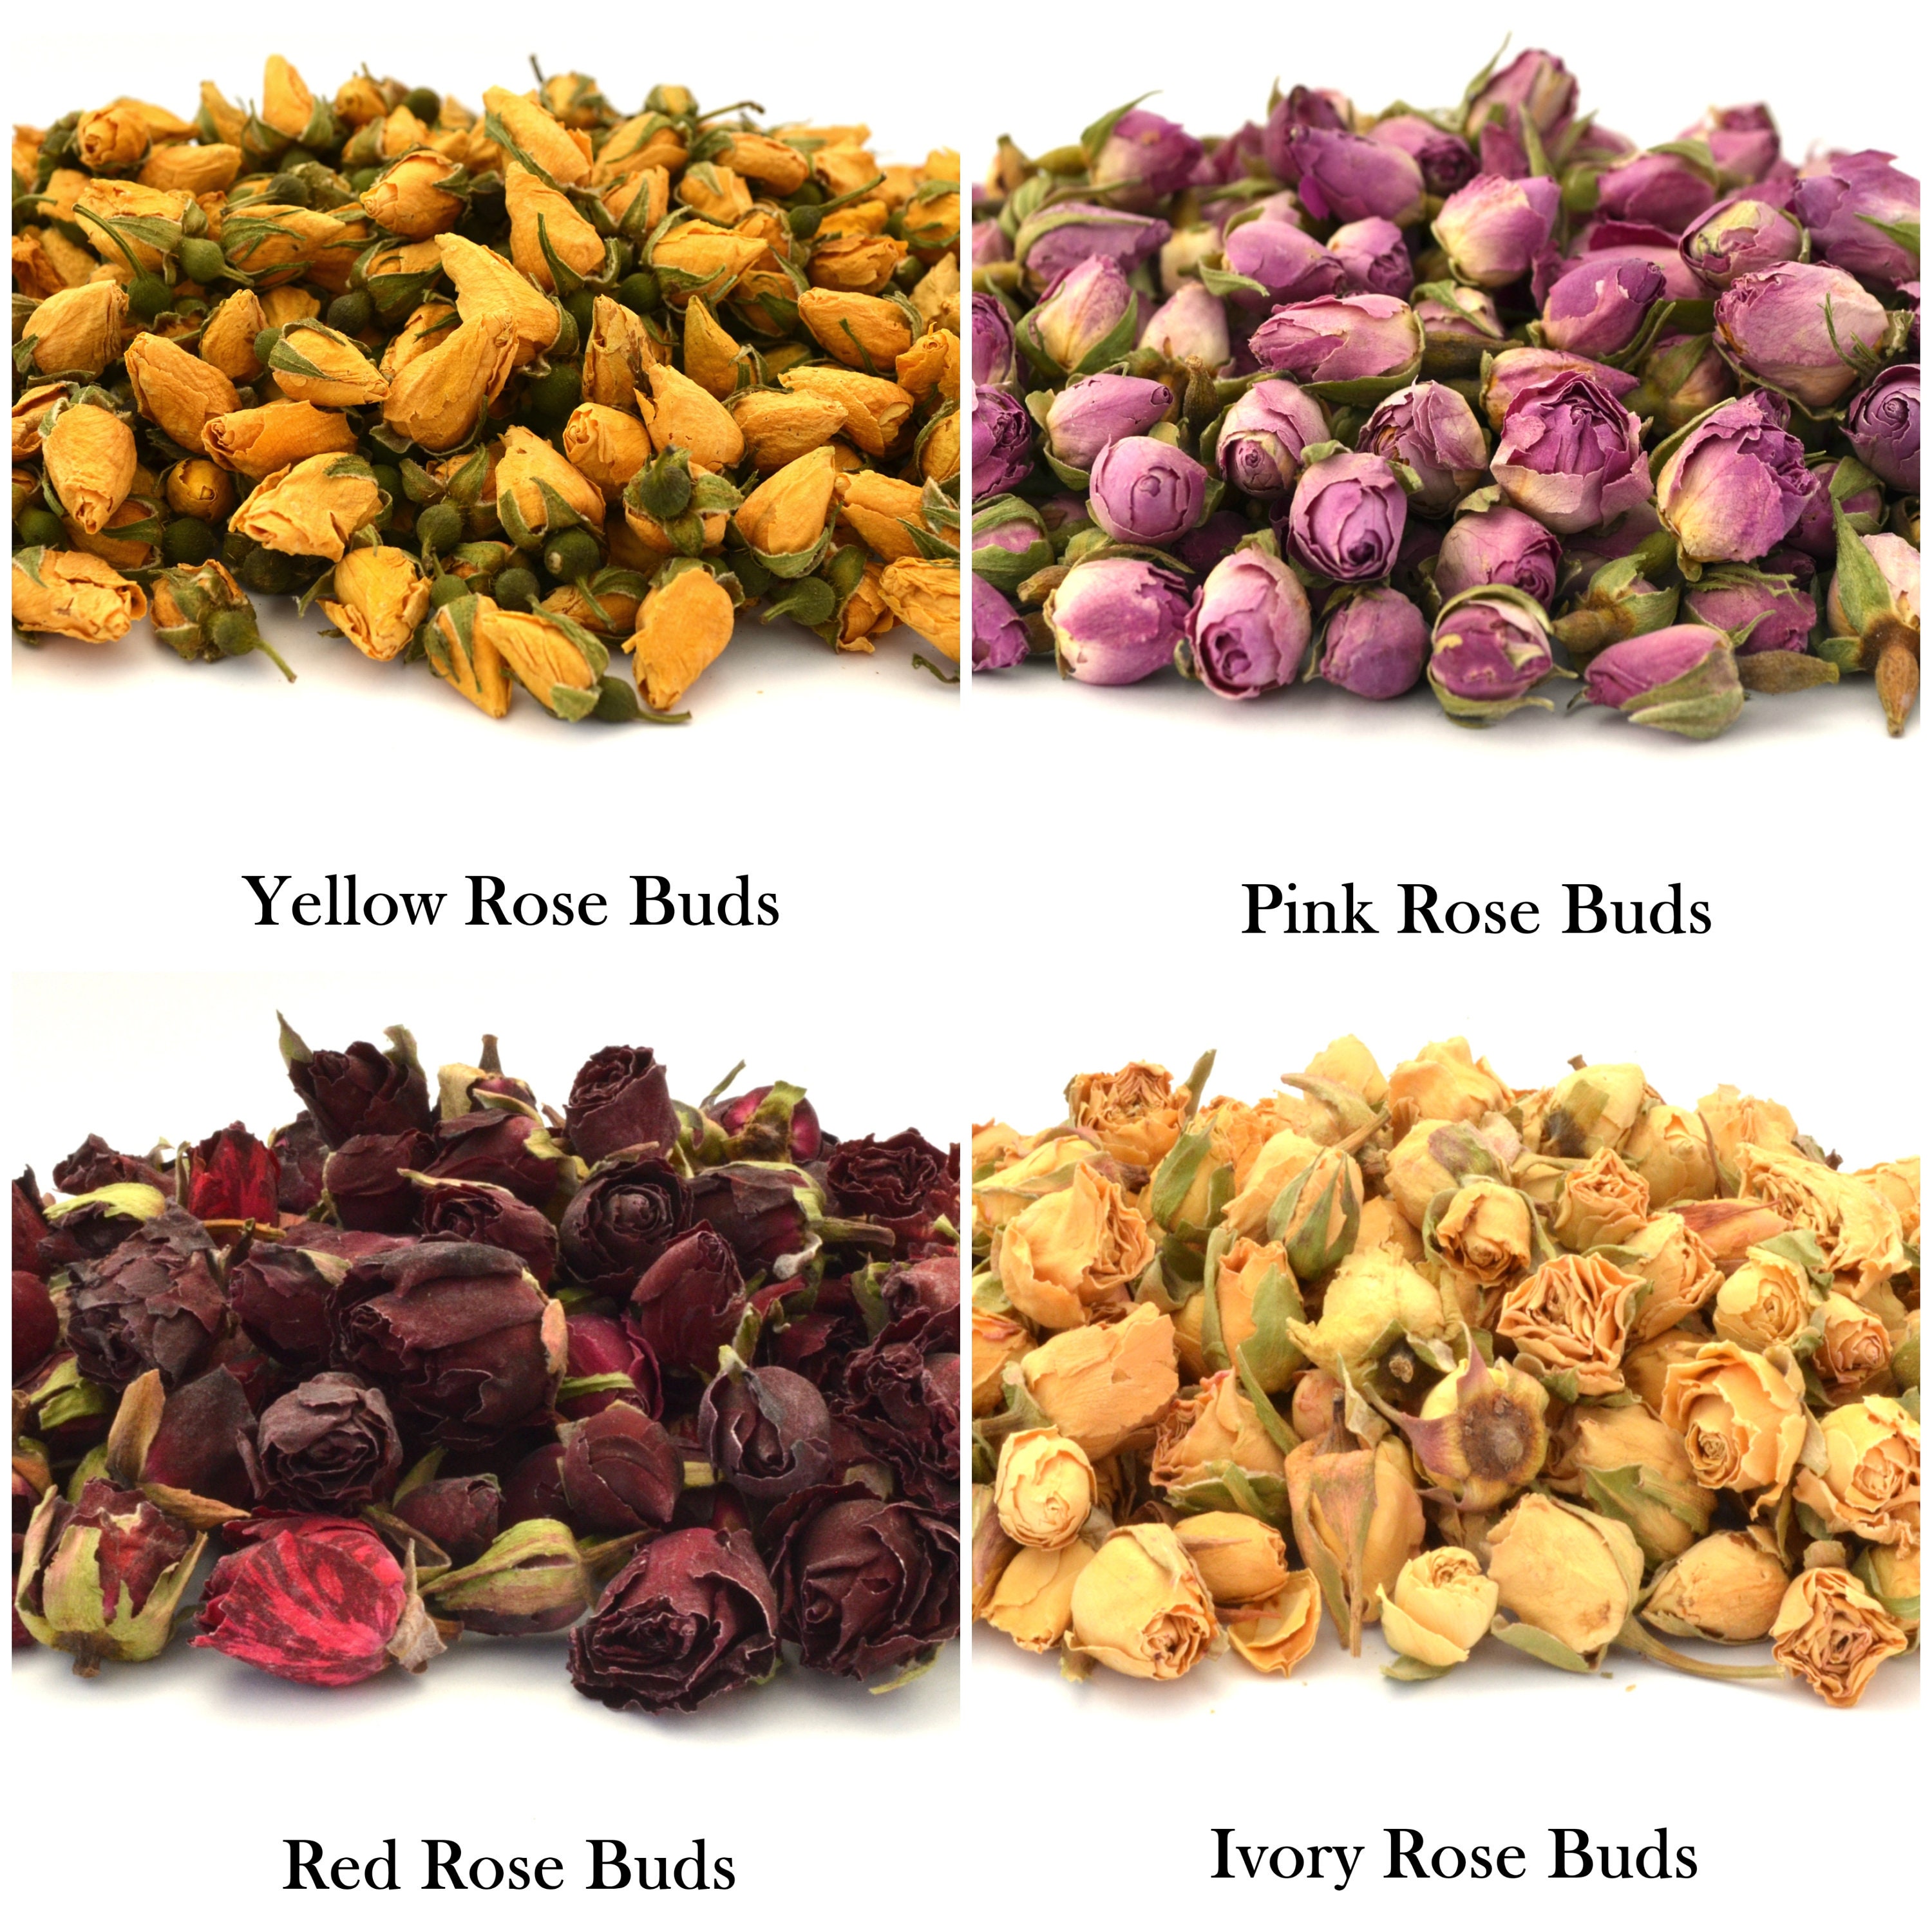 Dried Rose Petals | Edible, Food Grade Red Petals for Cooking and Tea |  Suitable for Soap Making, Infused Oils, Lipgloss, Bath Bombs, Bath, Wedding